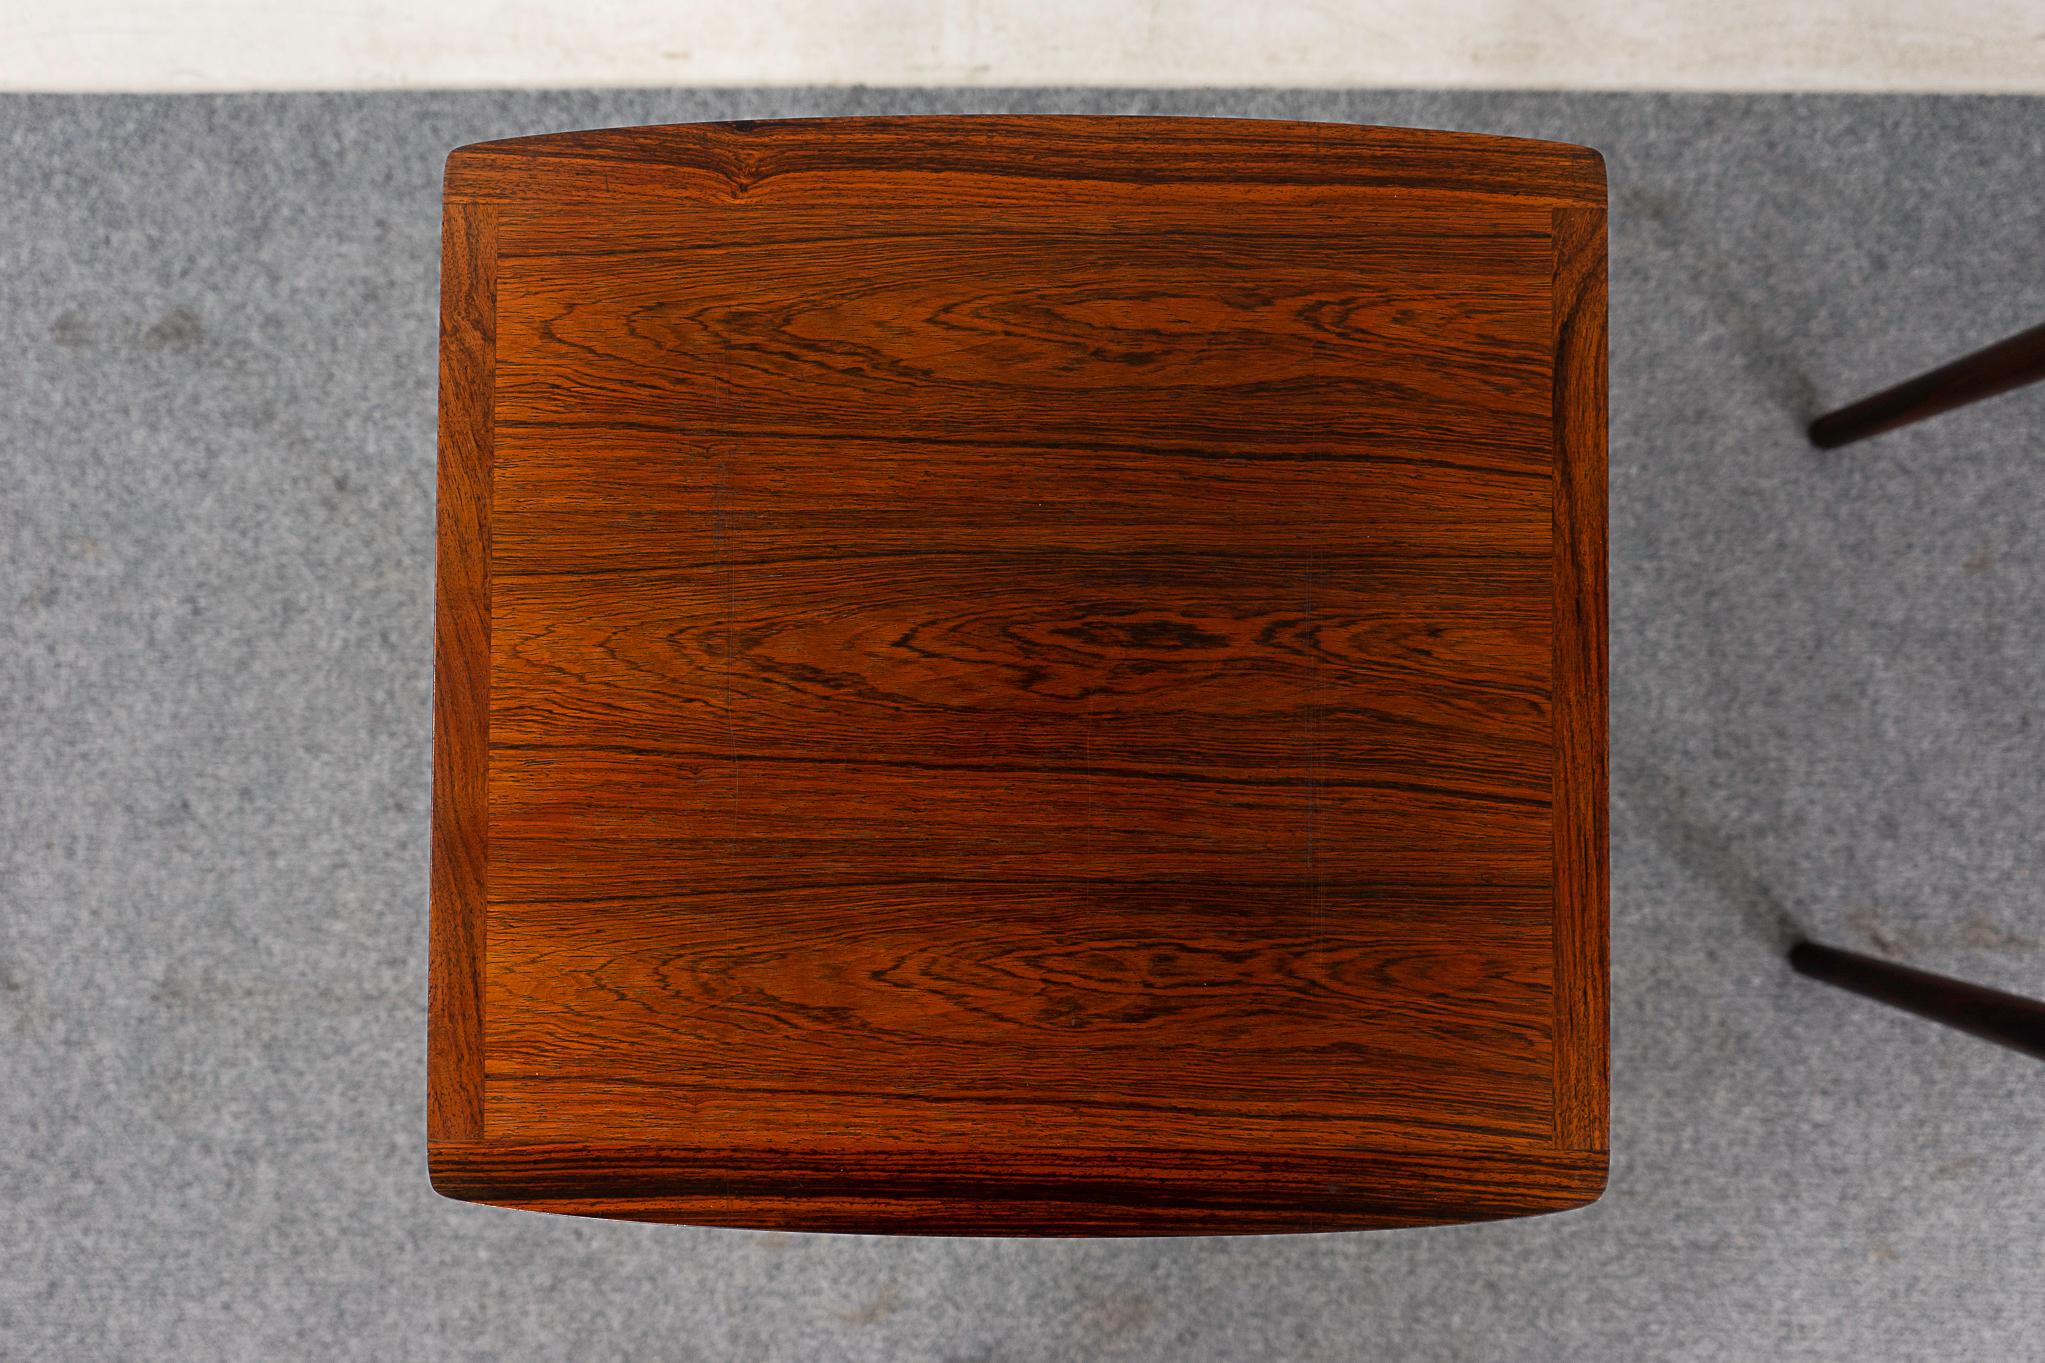 Danish Mid-Centruy Modern Rosewood Nesting Tables by Mobelintarsia For Sale 3